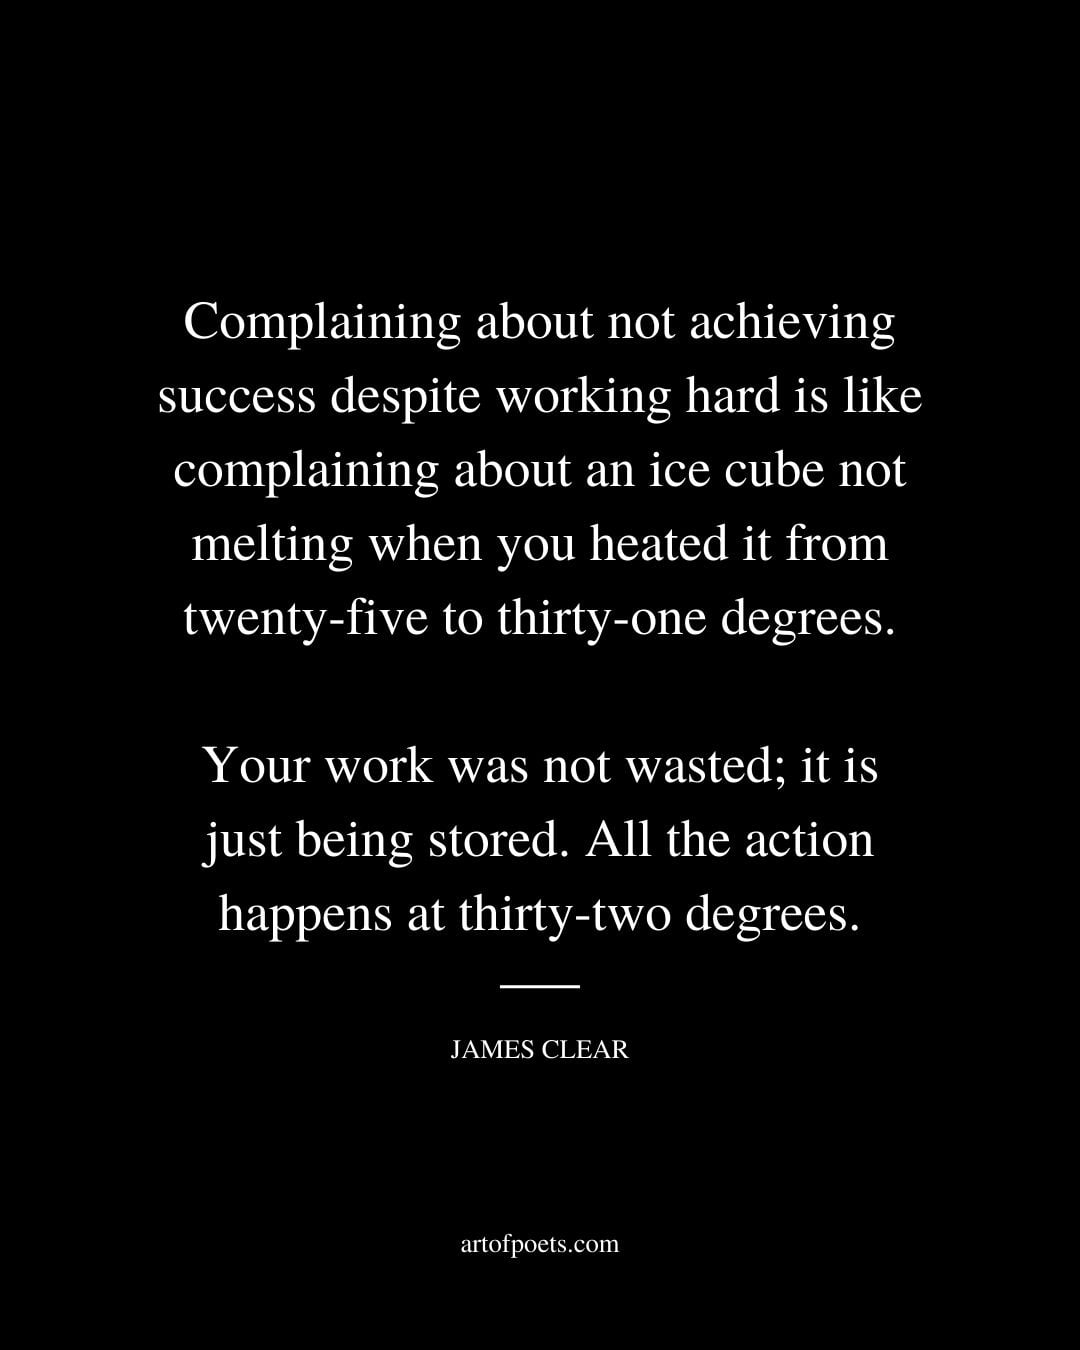 Complaining about not achieving success despite working hard is like complaining about an ice cube not melting